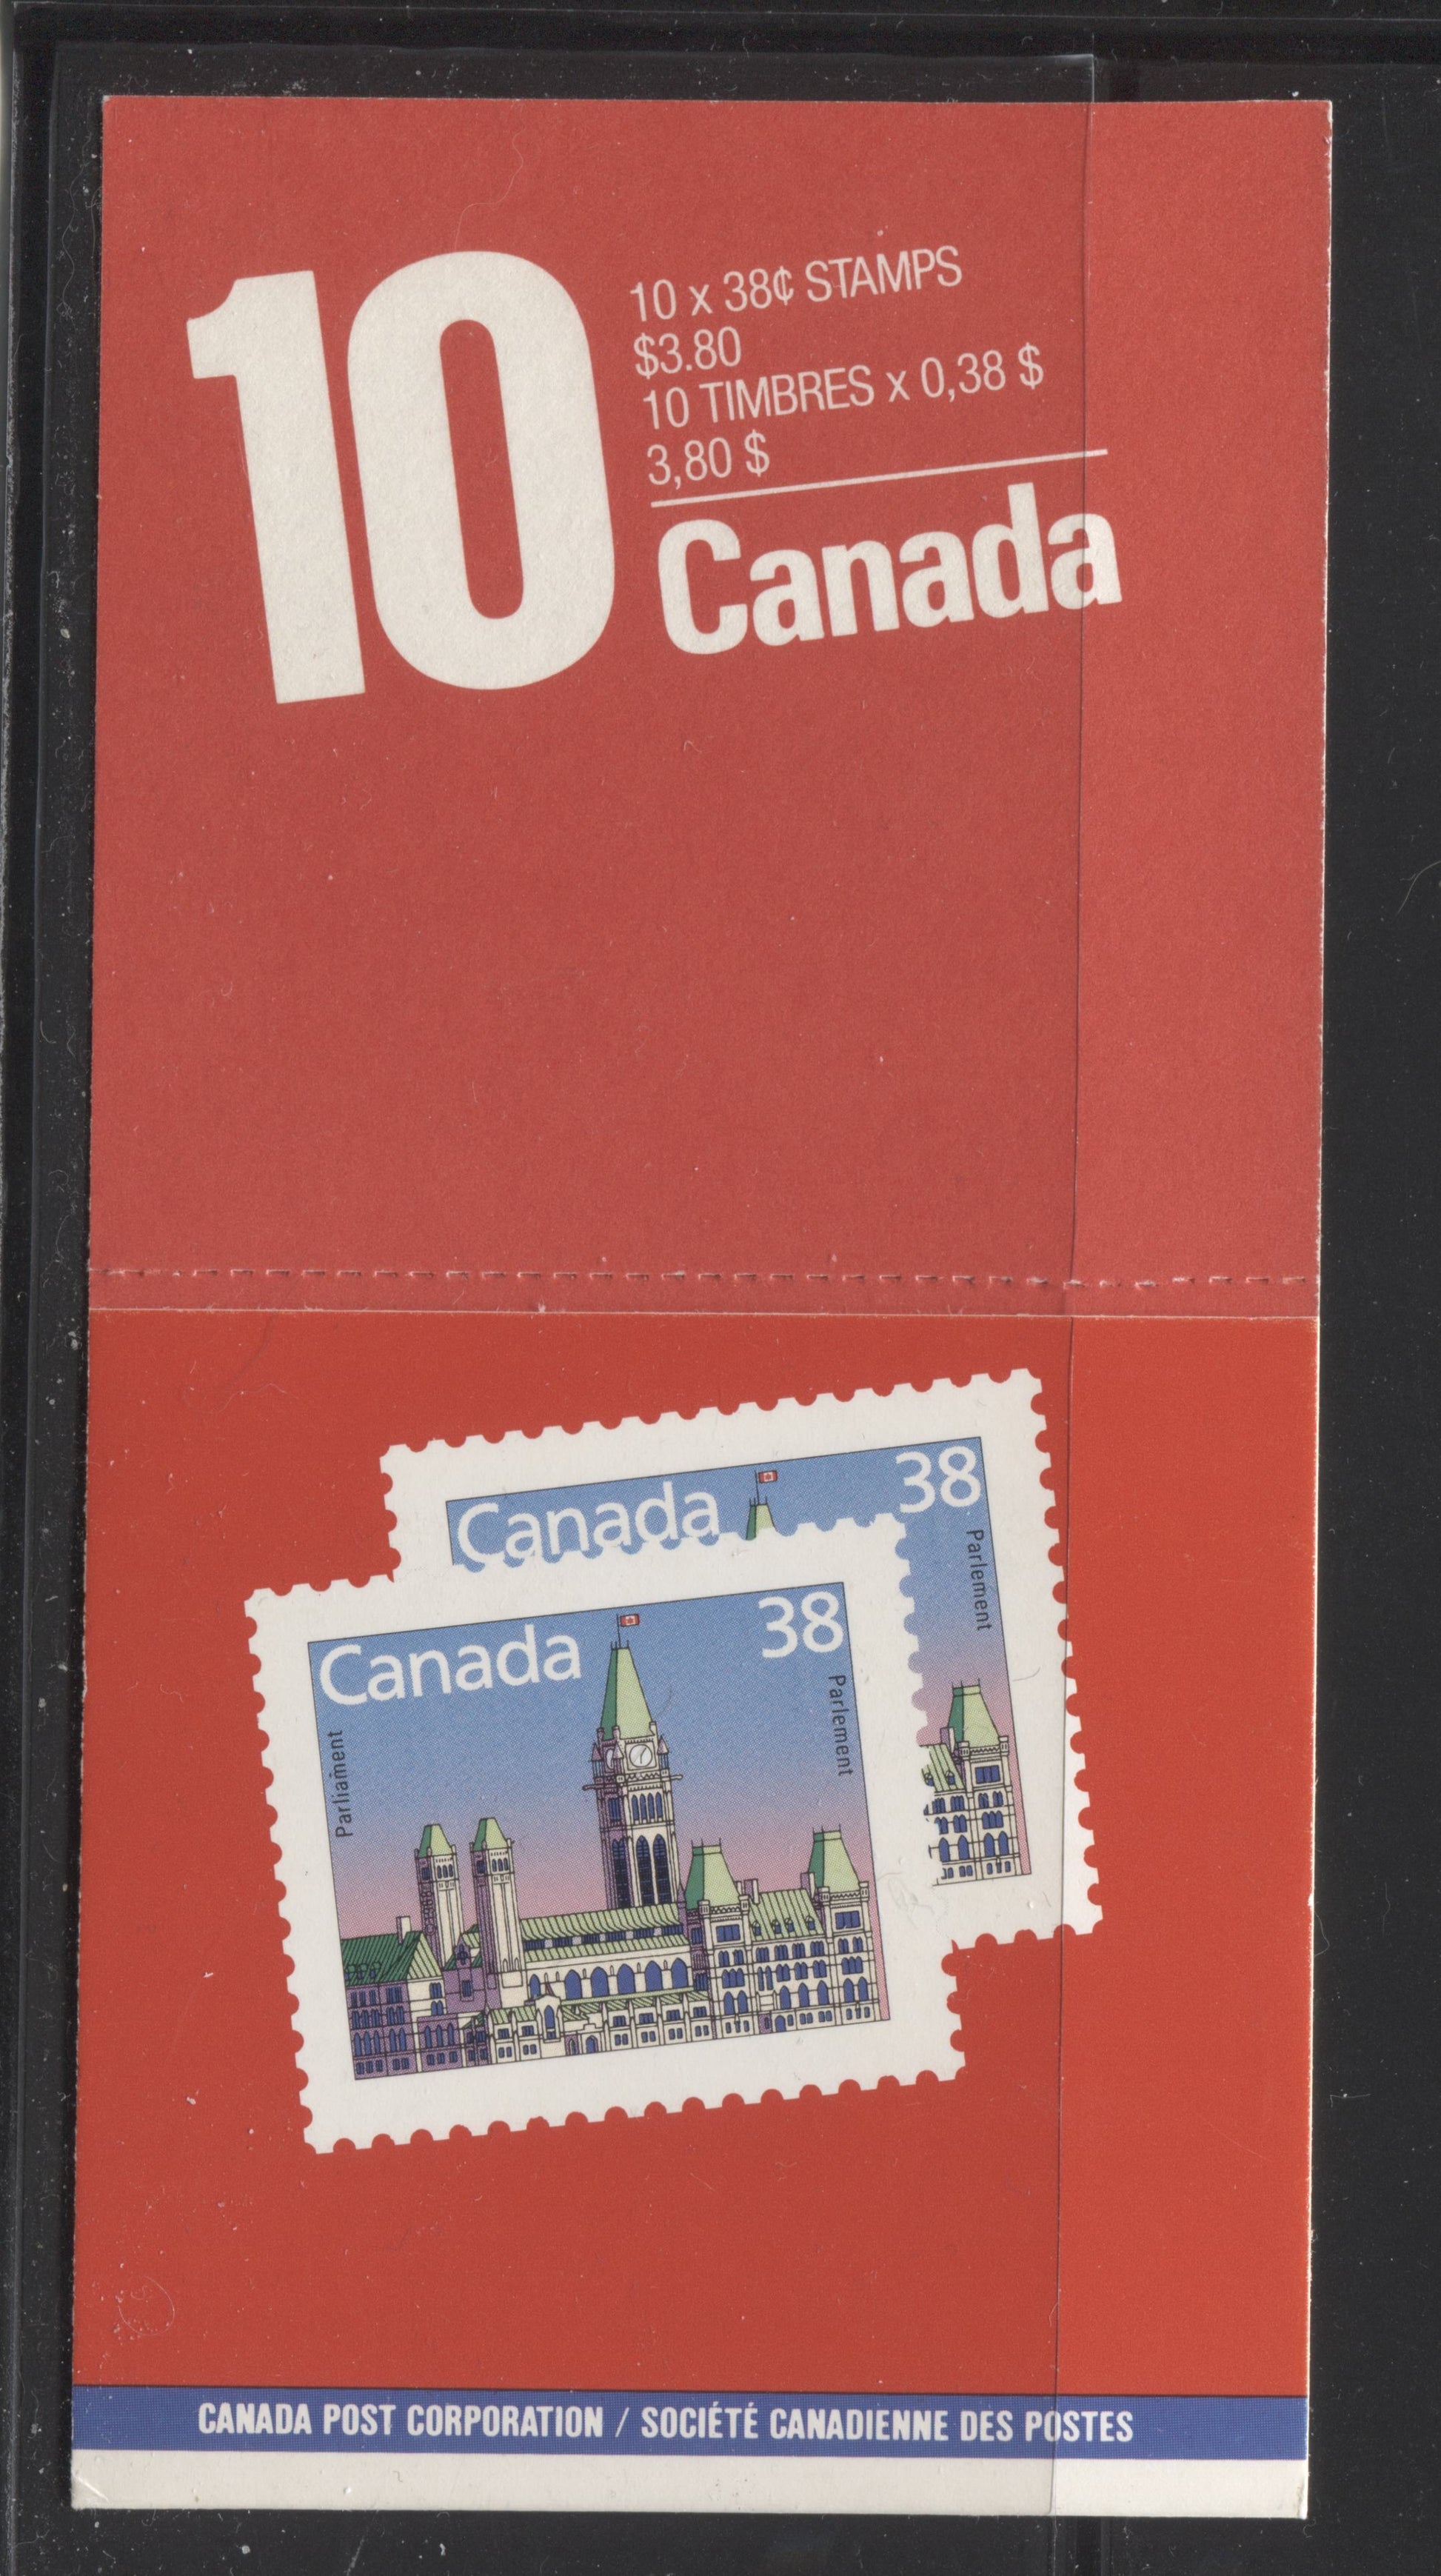 Canada #BK101a-c 1988-1996 Mammal and Architecture Issue, Complete $3.80 Booklet, Coated Slater Paper, Dead Paper, 4 mm GT-4 Tagging Brixton Chrome 